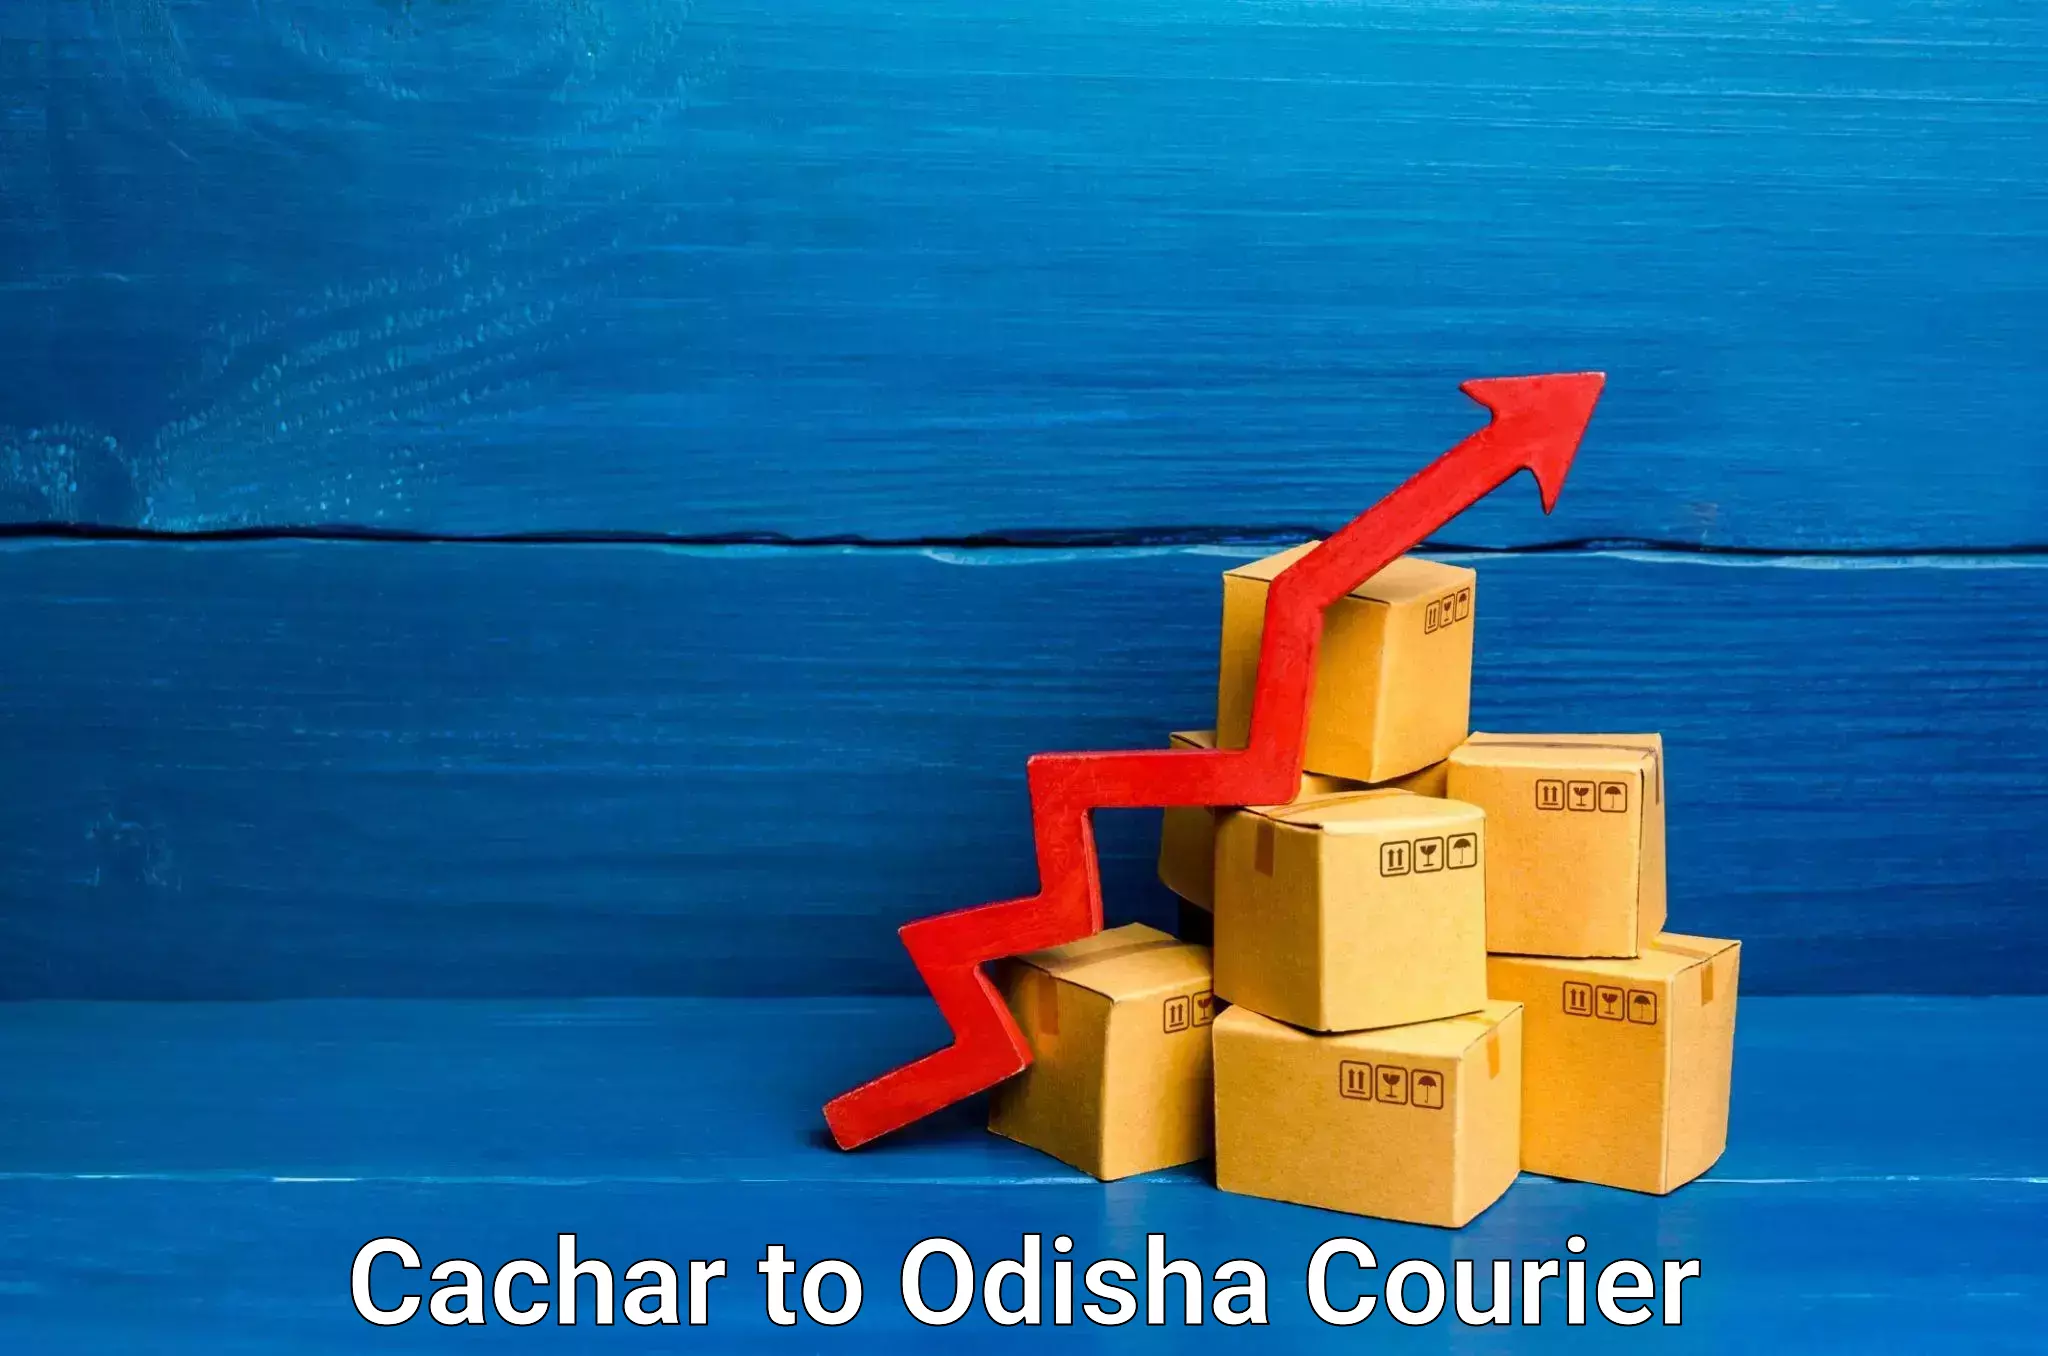 Scheduled delivery Cachar to Dukura